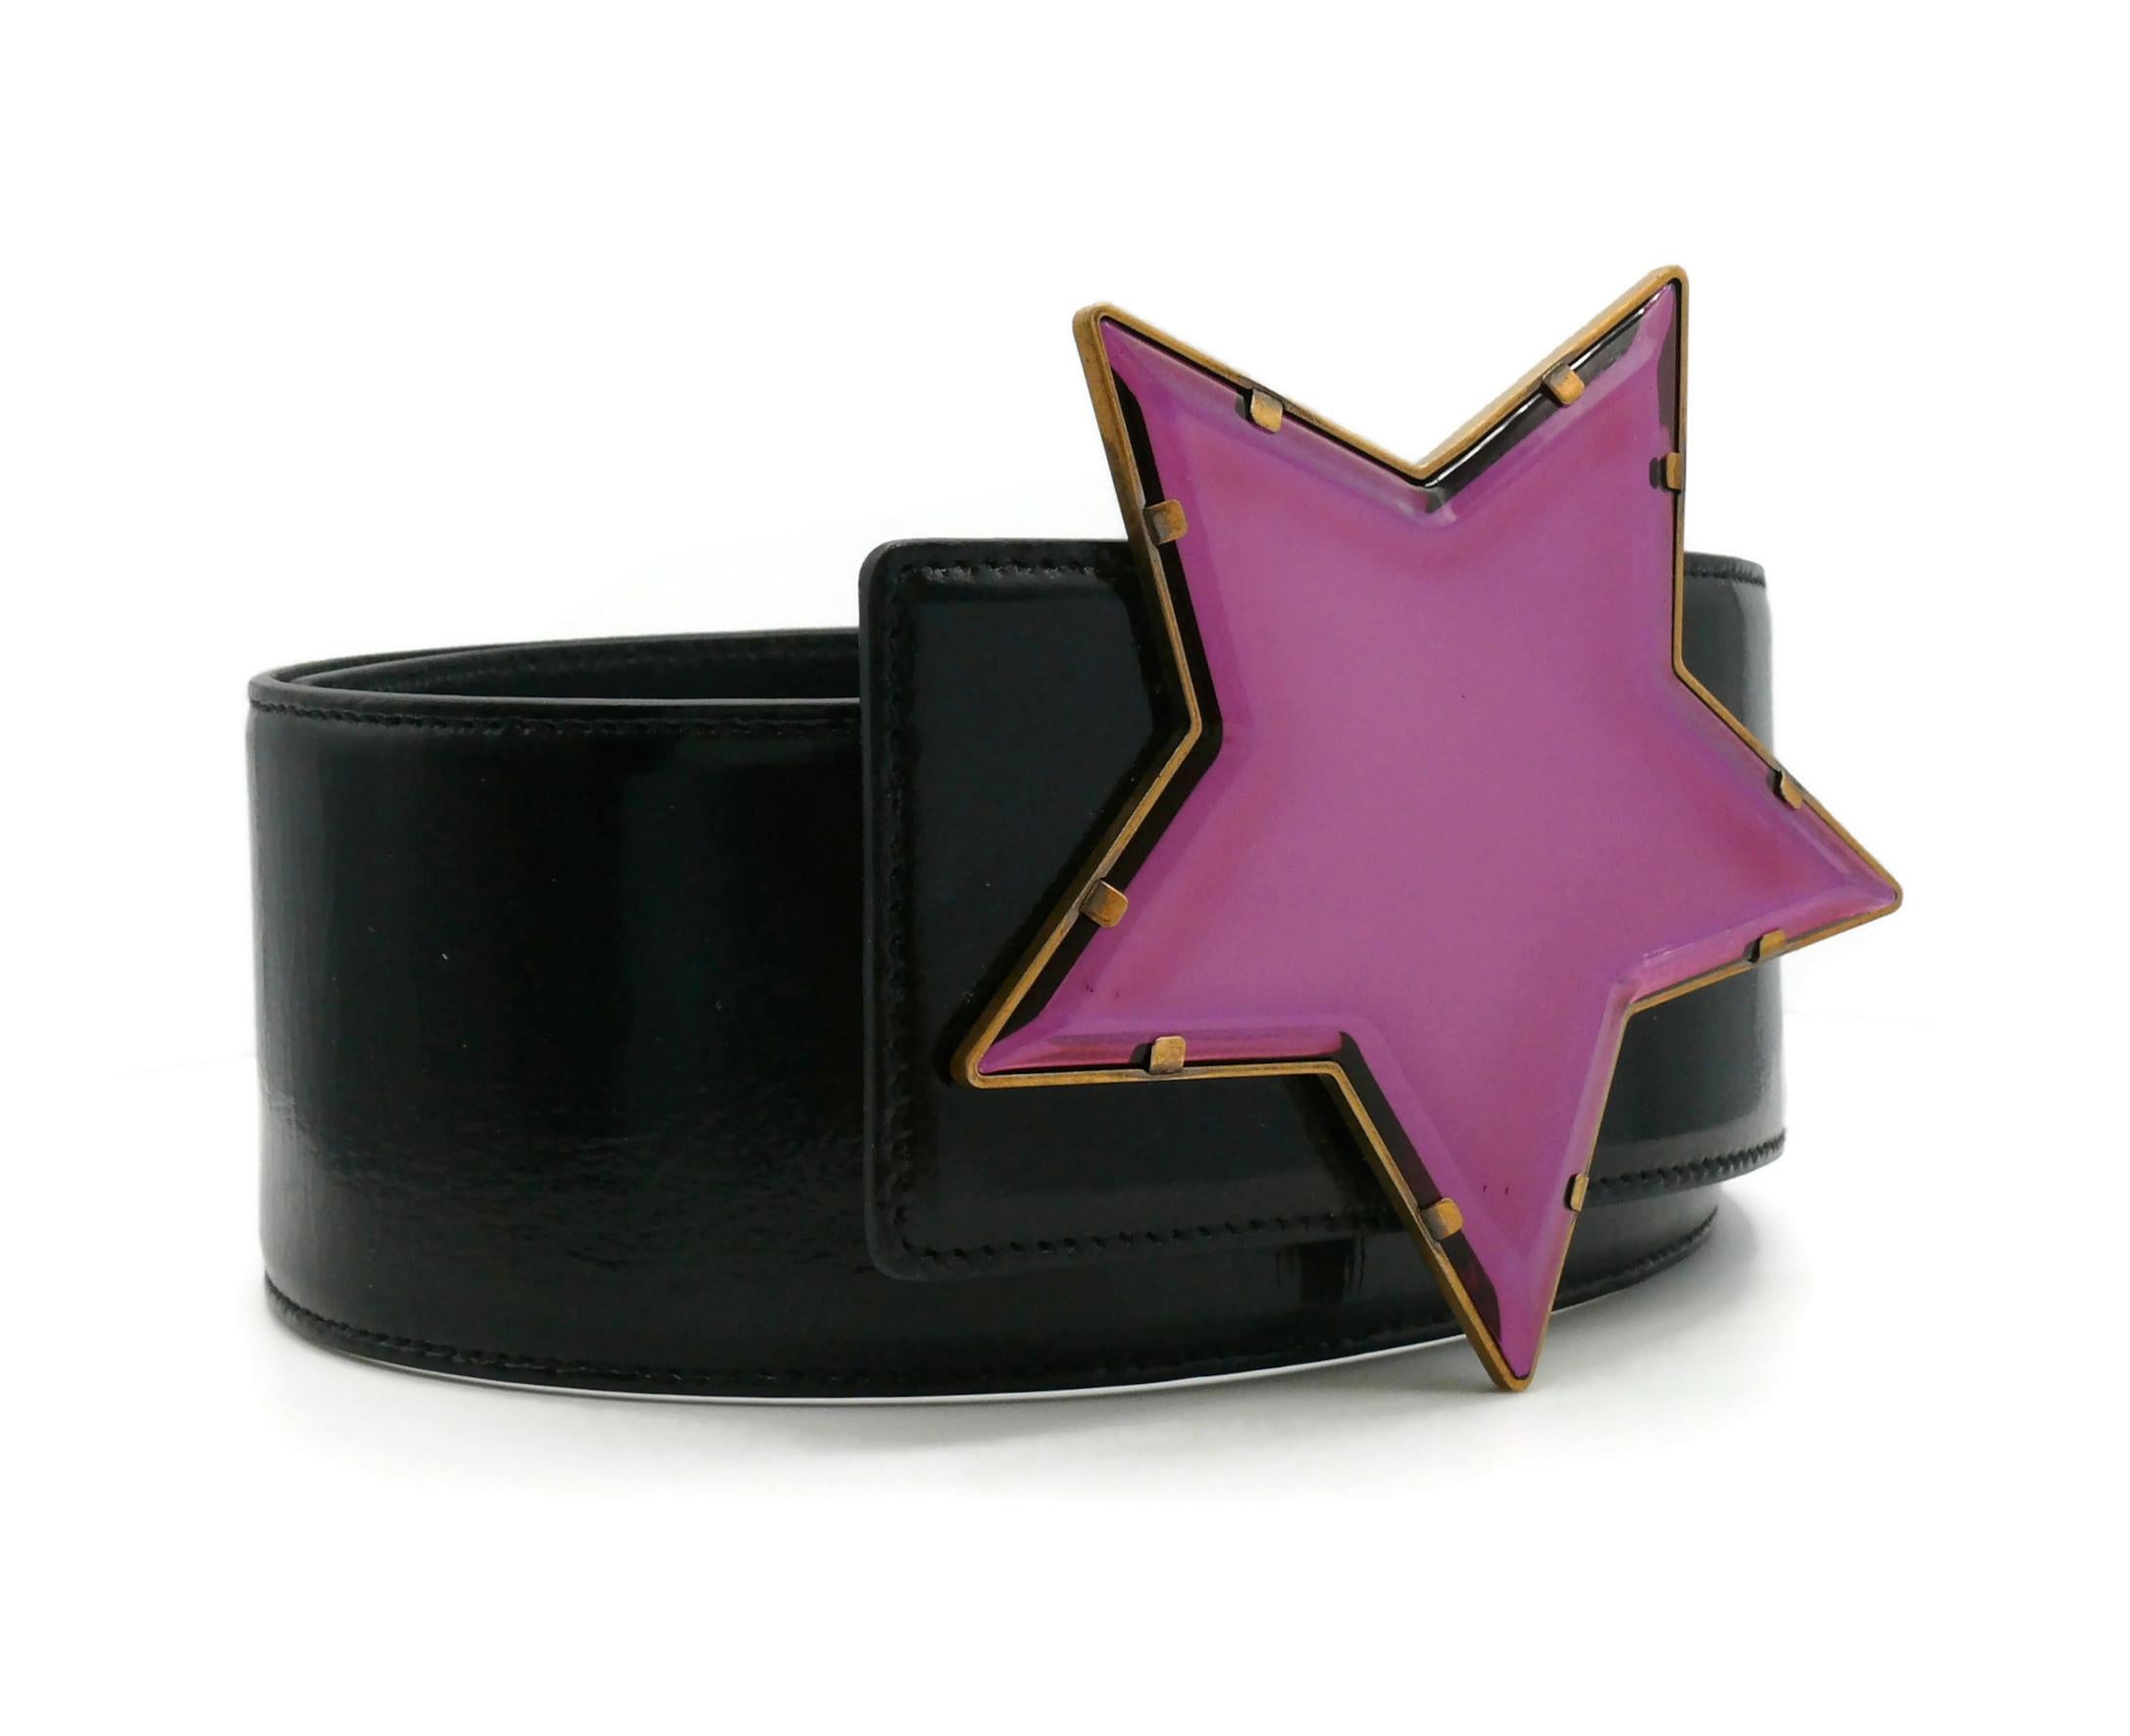 YVES SAINT LAURENT wide black patent leather belt featuring a massive bronze tone star buckle embellished with a mirror plexiglass in pink/mauve color.

Snap button closure (3 lengths).

Embossed YVES SAINT LAURENT Rive Gauche Made in